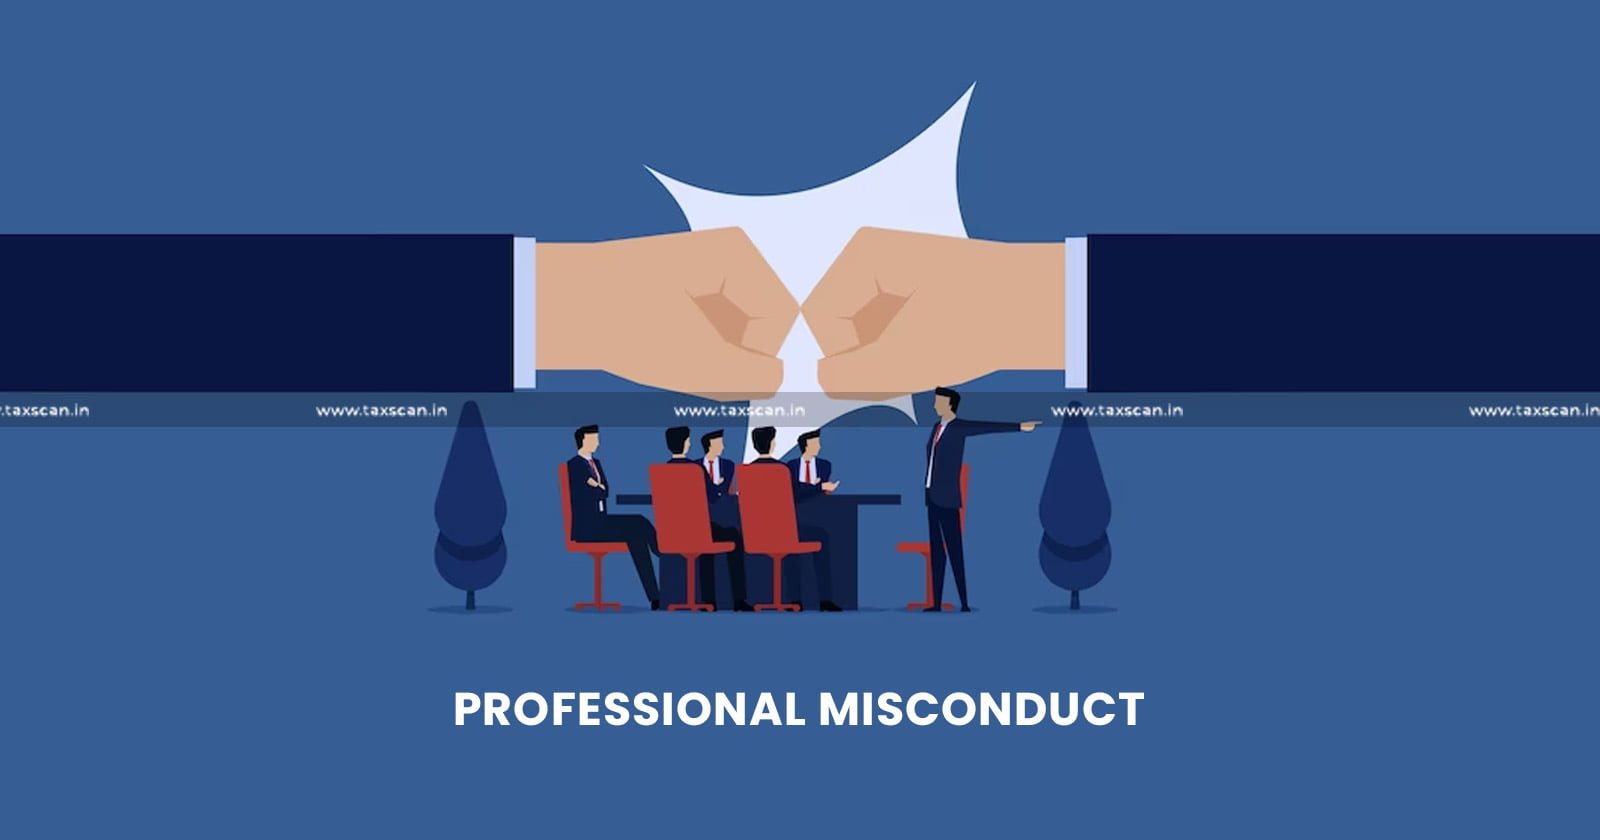 Error in Classification of Trade - Error - Classification of Trade - Trade - Gross Negligence - ICAI finds CA Not Guilty of Professional Misconduct - ICAI - Professional Misconduct - taxscan